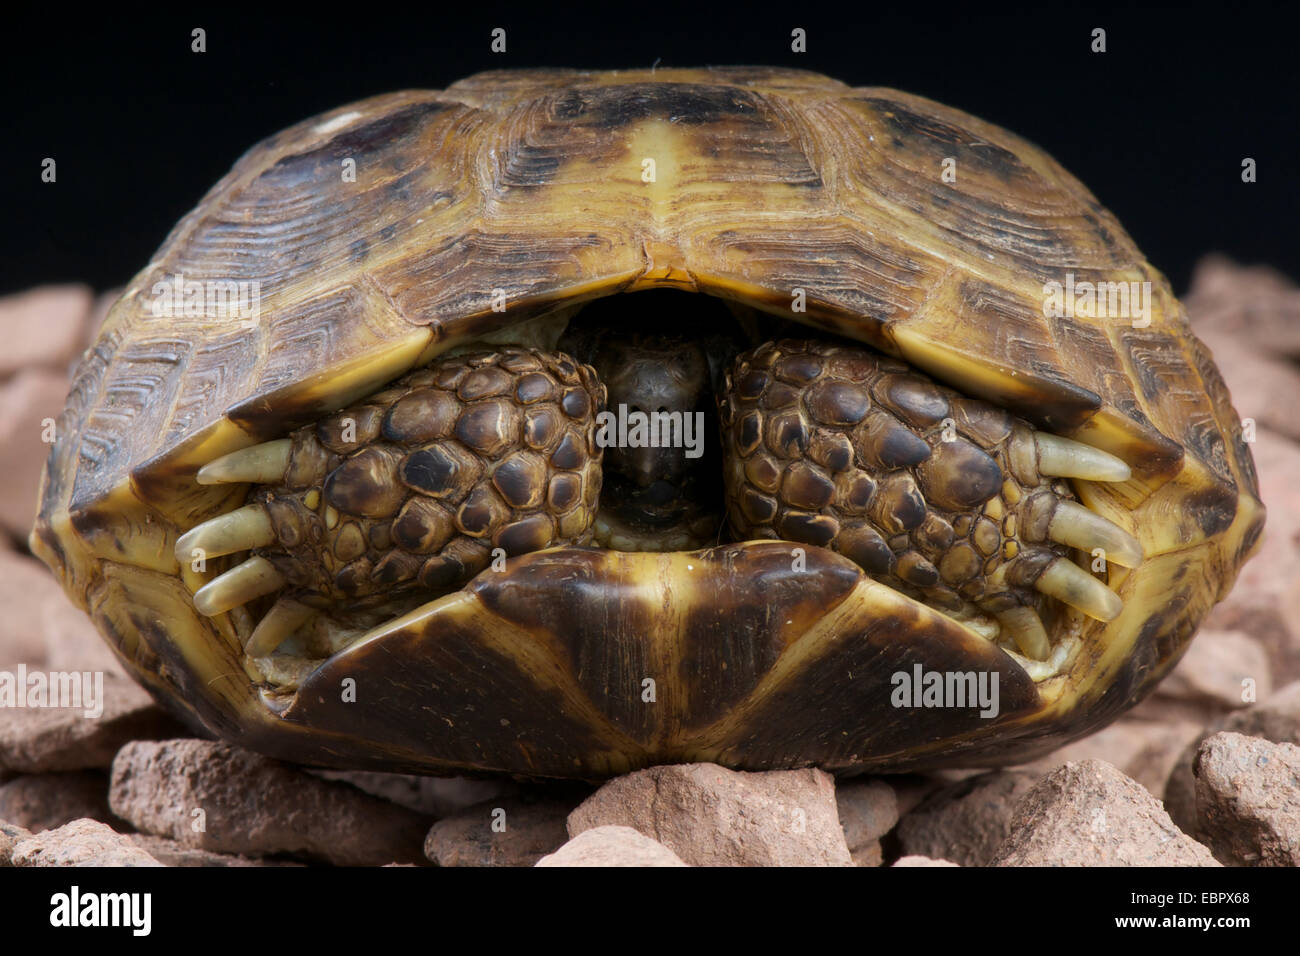 Russian tortoise / Agrionemys horsfieldii Stock Photo